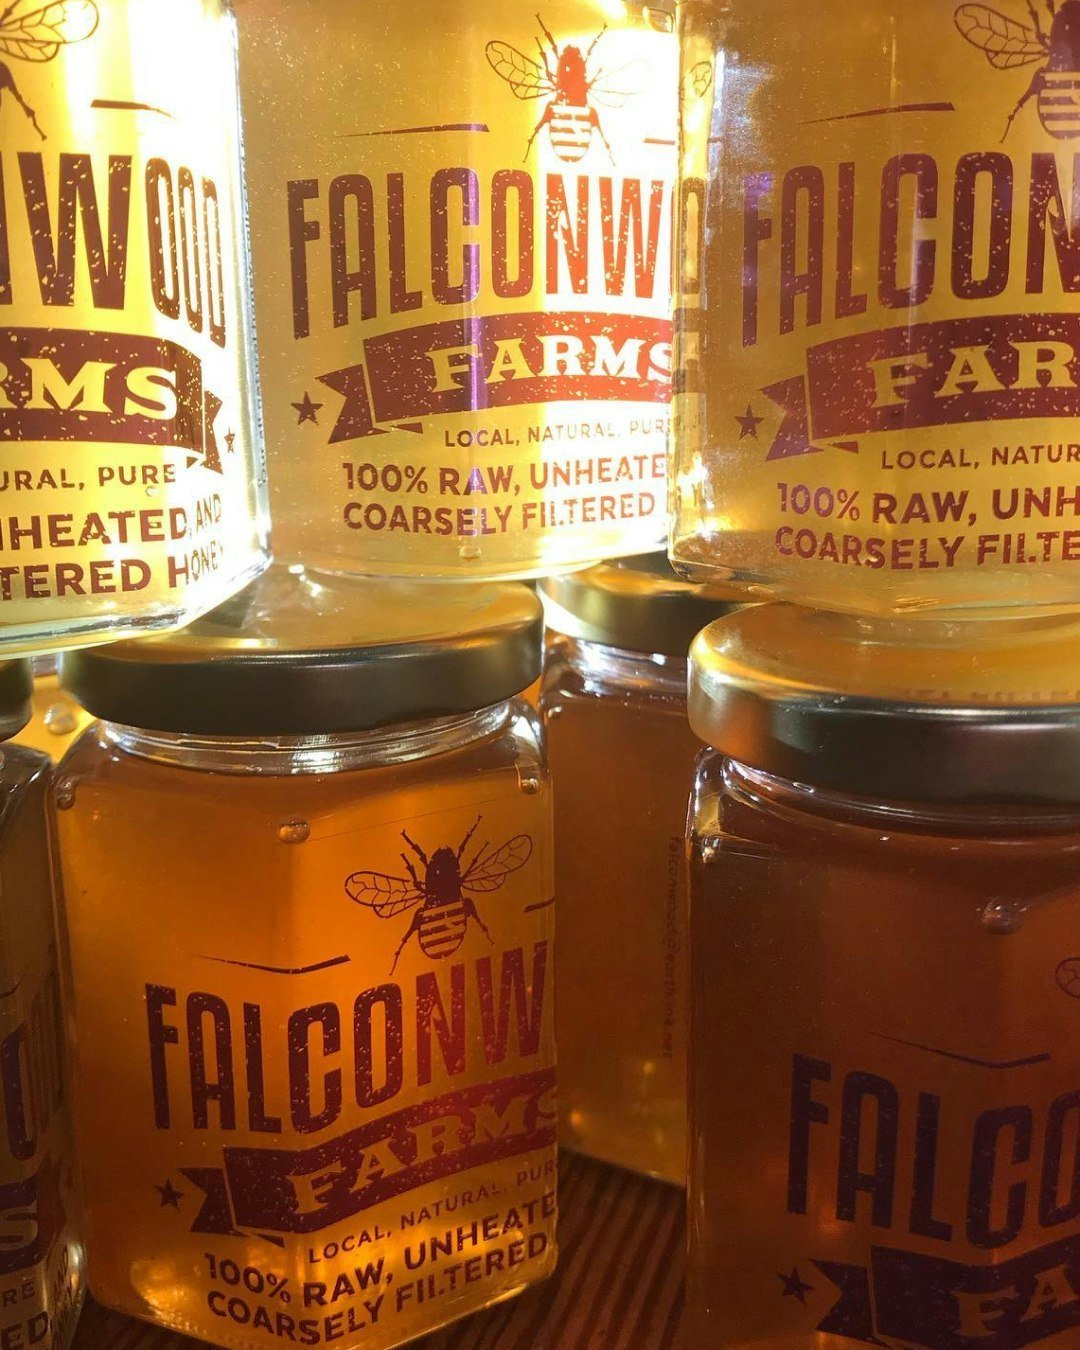 We are buzzing with excitement for the first market of the year &amp; getting our hands on raw honey from @falconwoodfarm 🐝 
Their apiary a 100% women-owned and focus is on sharing their honey as well as rescuing &amp; selling bees 

Make sure to st